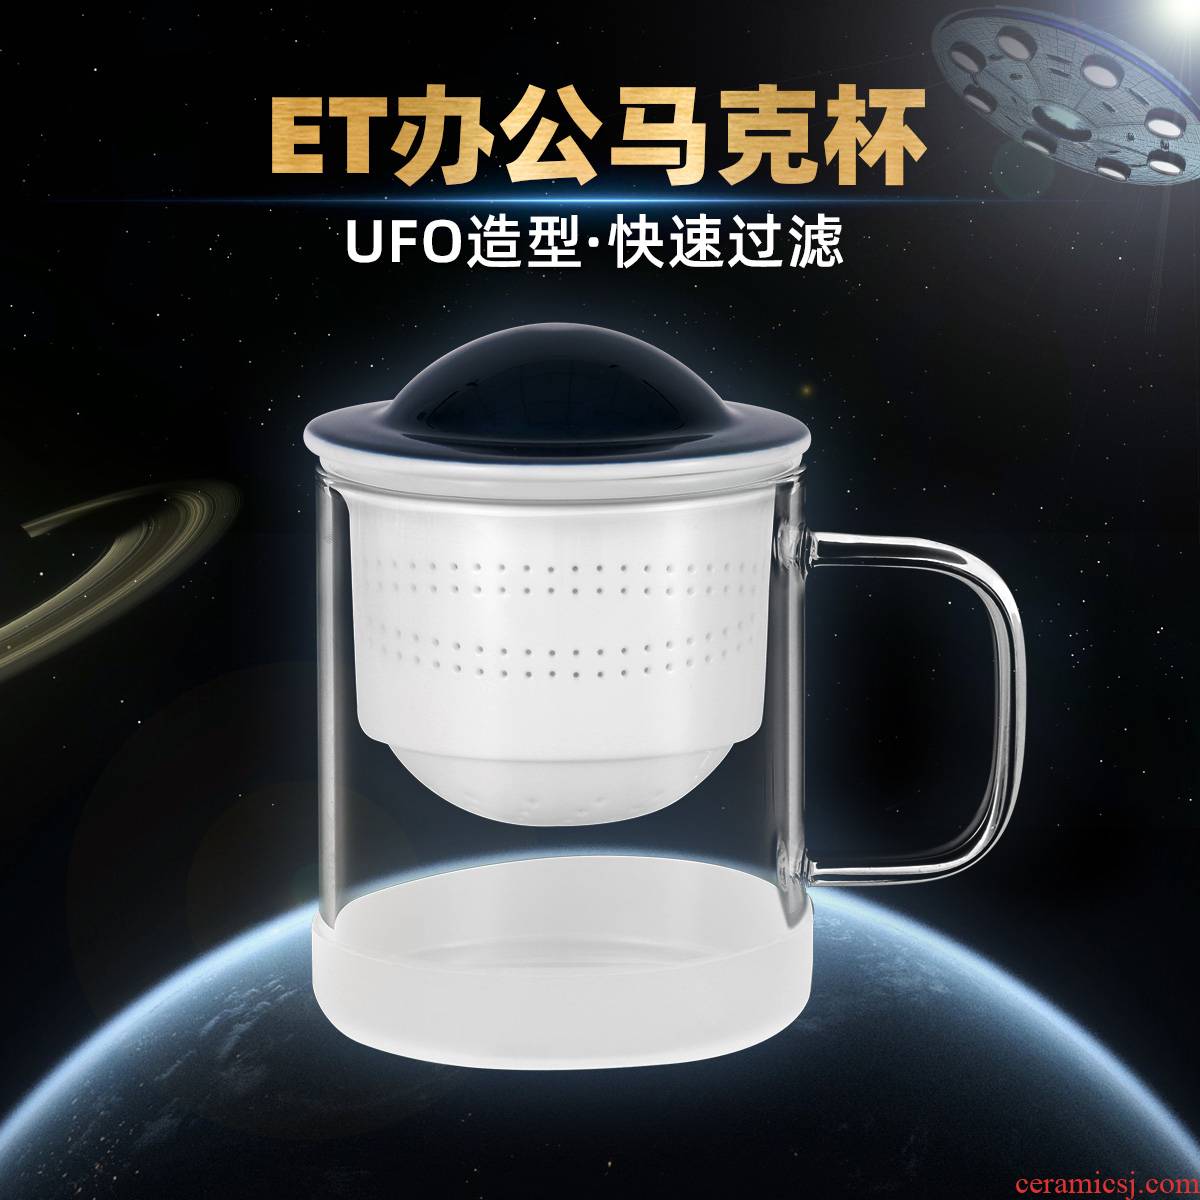 Yu implement separation ET office mark cup tea tea glass ceramic container) filter glass cup